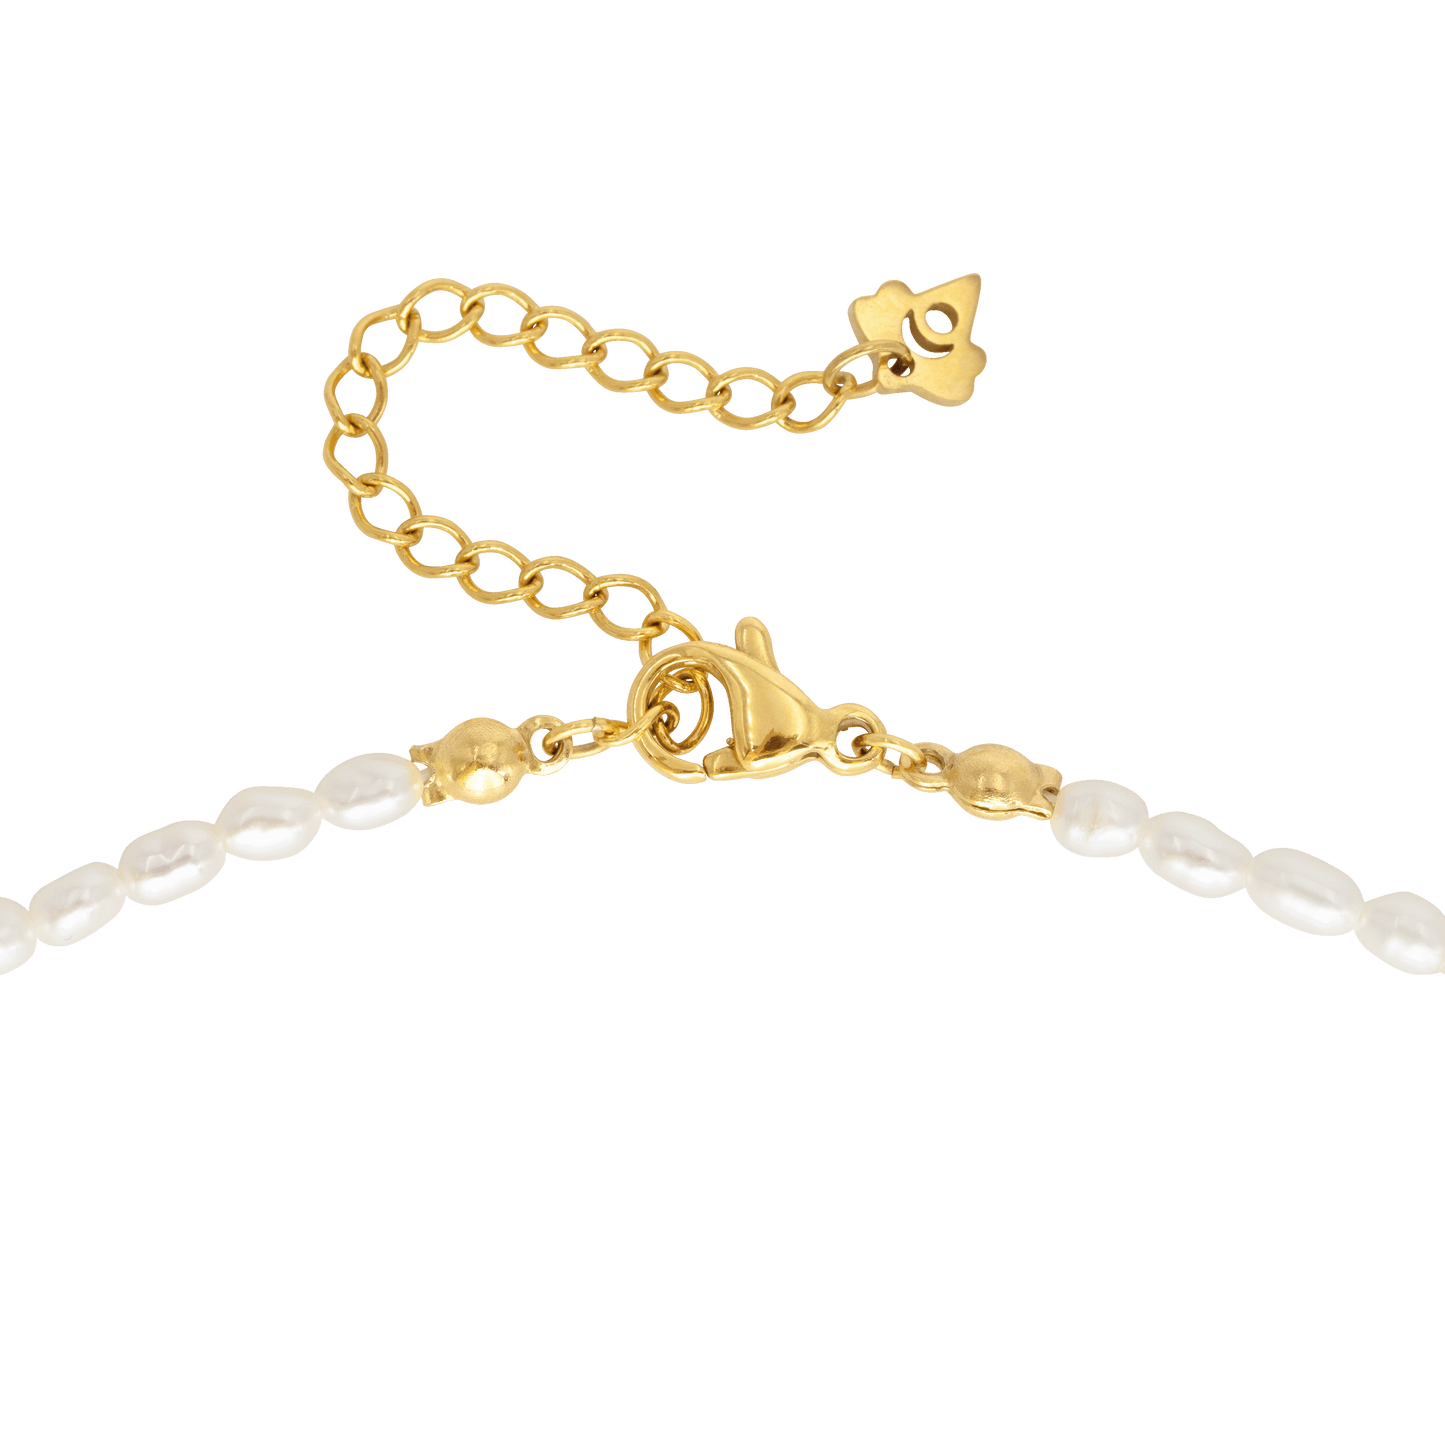 Lolas Love Pearl Power Necklace Gold